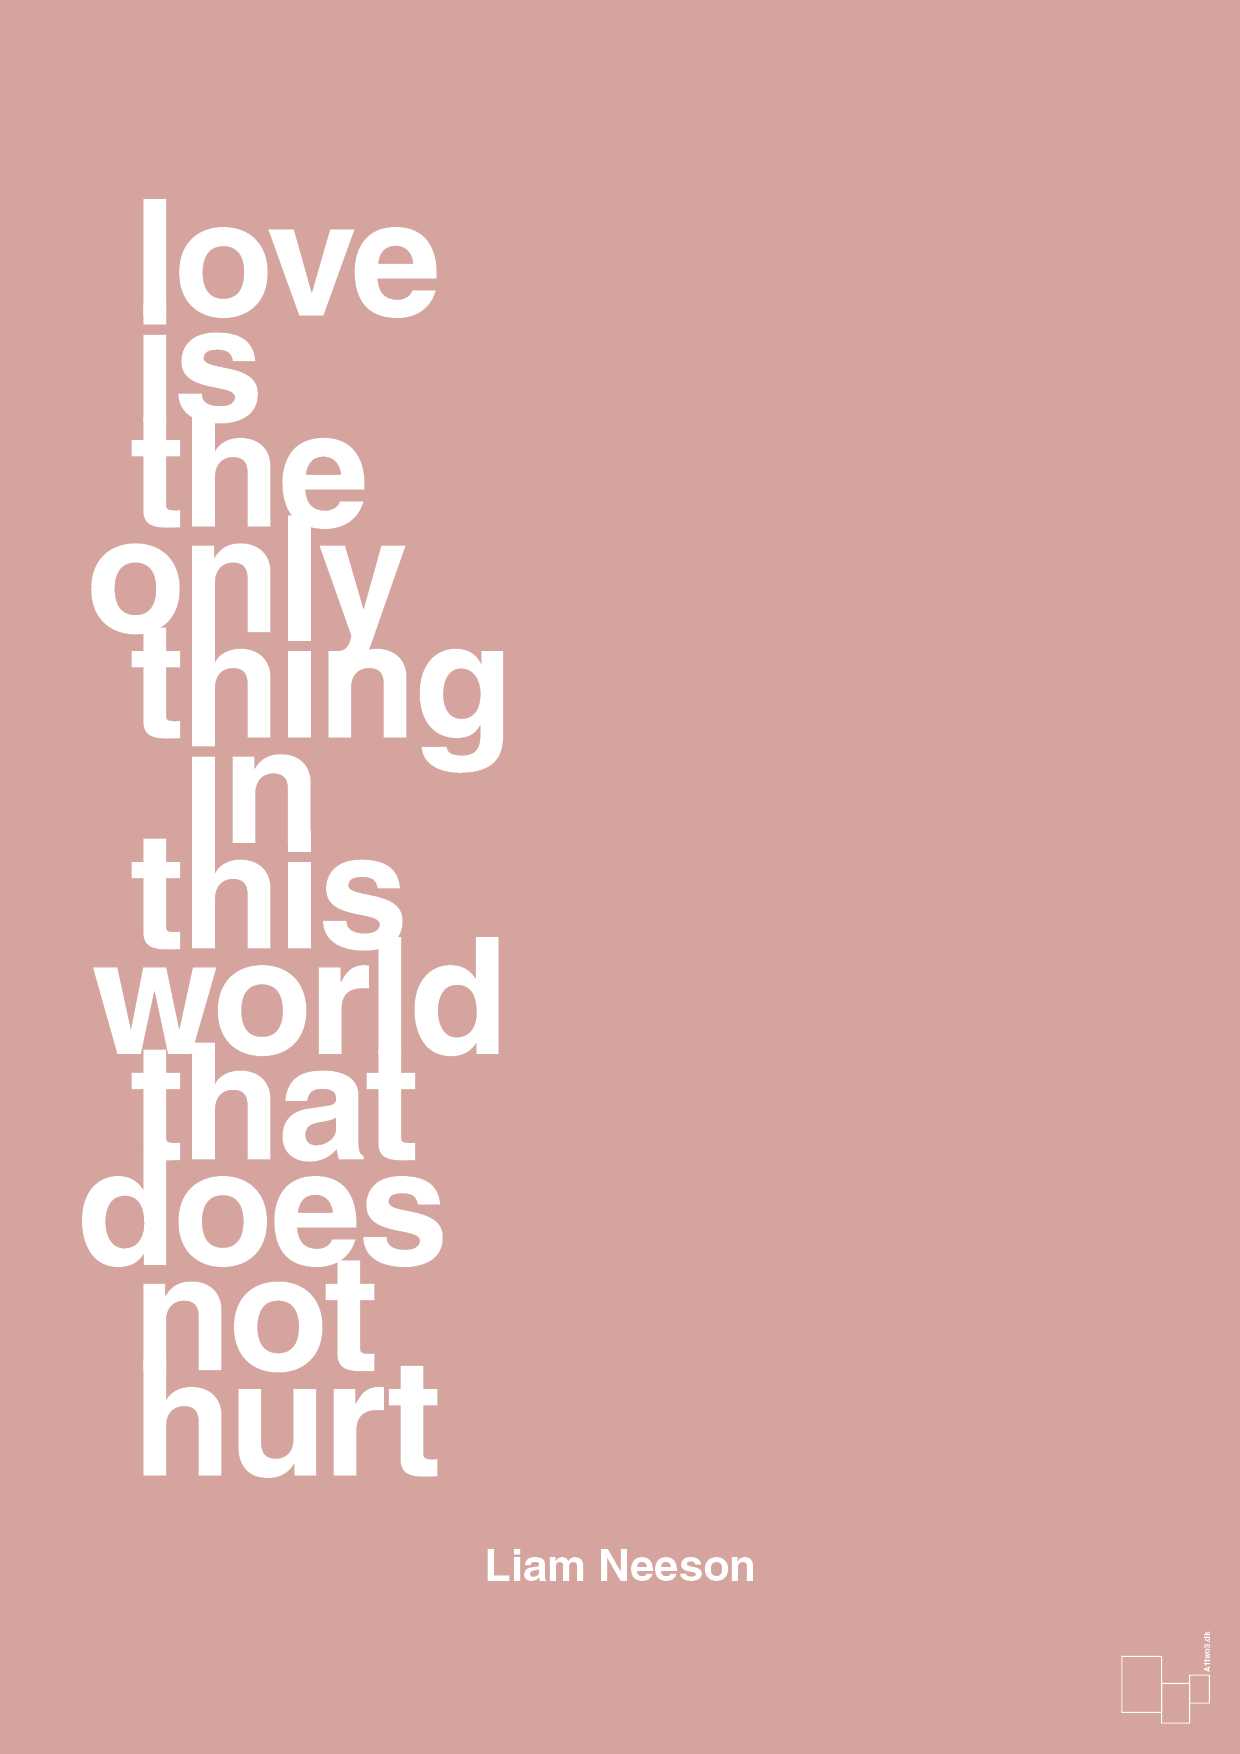 love is the only thing in this world that does not hurt - Plakat med Citater i Bubble Shell